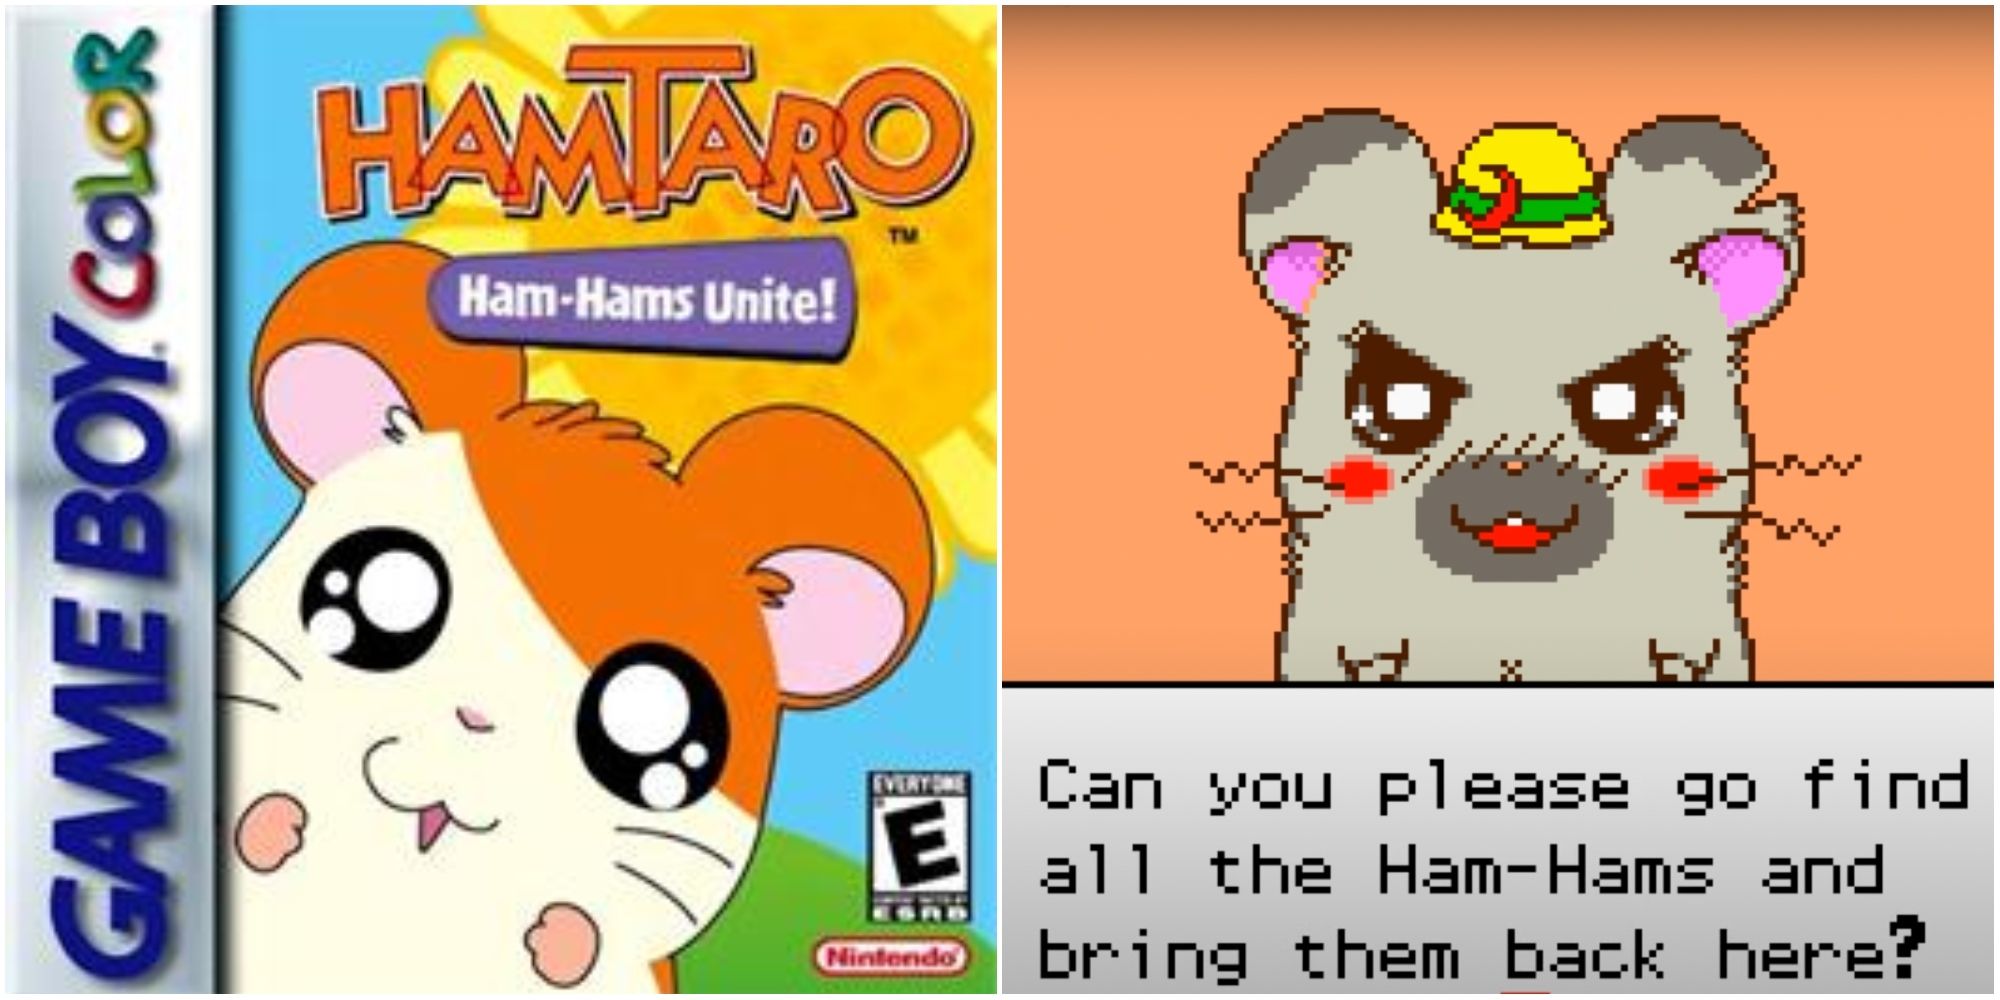 Hamtaro being given a mission to find all the Ham-Hams